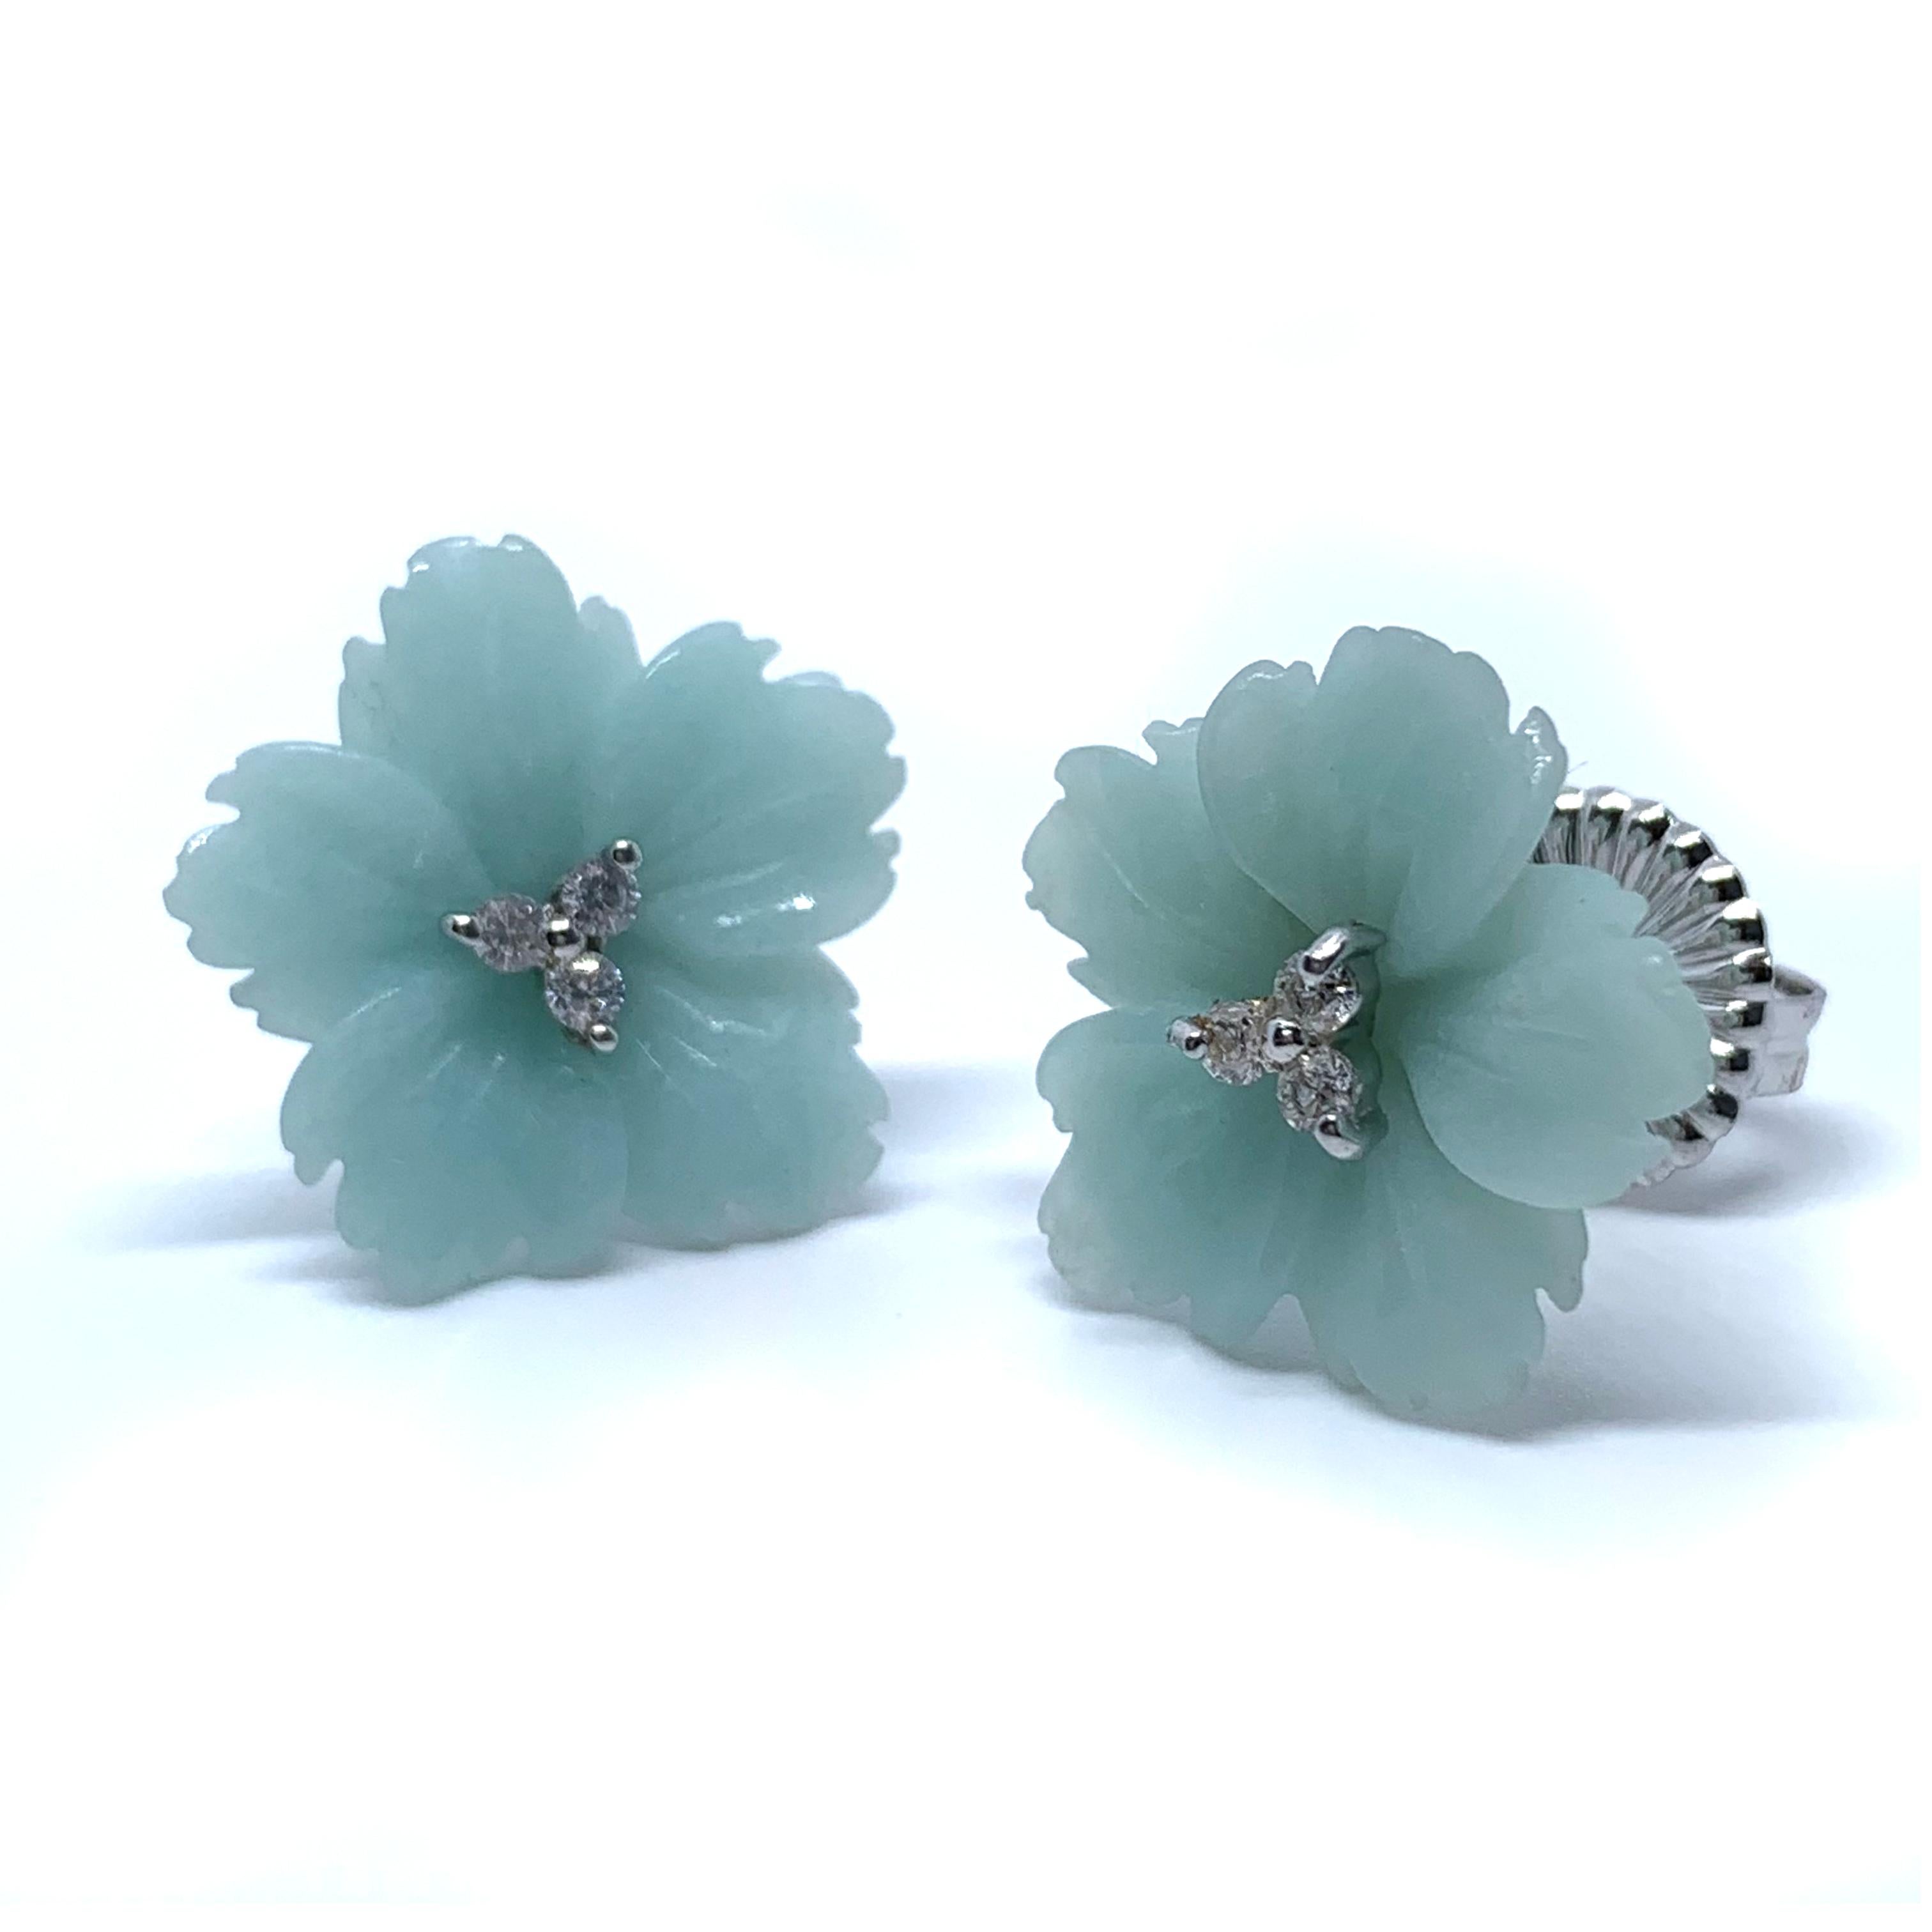 Elegant 18mm Carved Green Quartzite Flower Sterling Silver Earrings

This earrings features 2 pieces of 18mm green quartzite carved into beautiful three dimension flower, adorned with round simulated diamond, handset in platinum rhodium plated